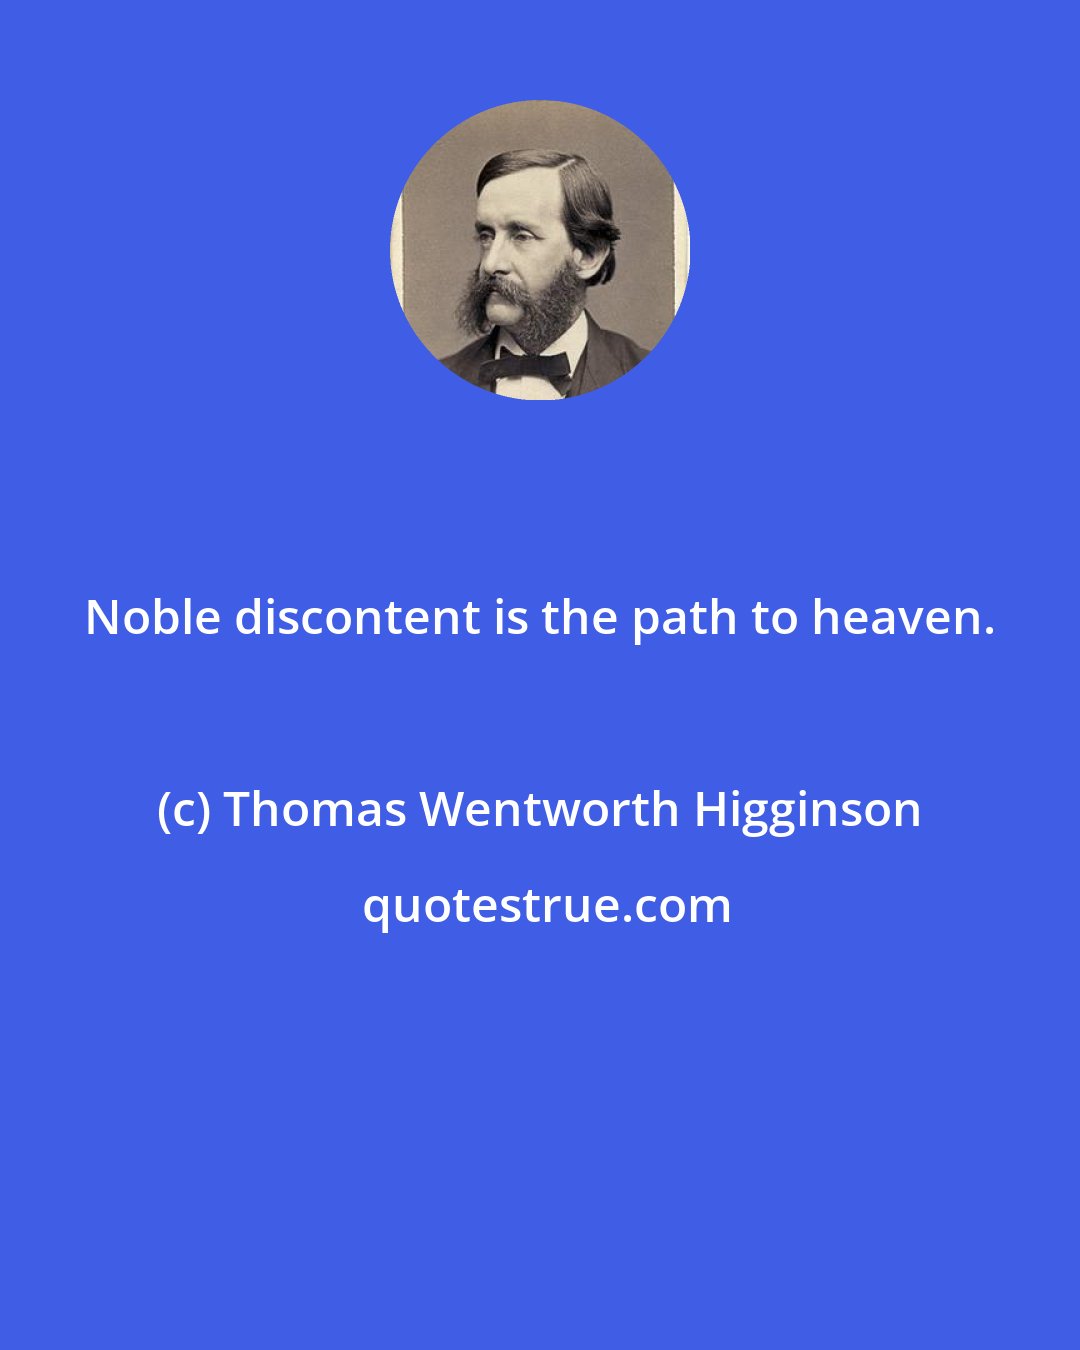 Thomas Wentworth Higginson: Noble discontent is the path to heaven.